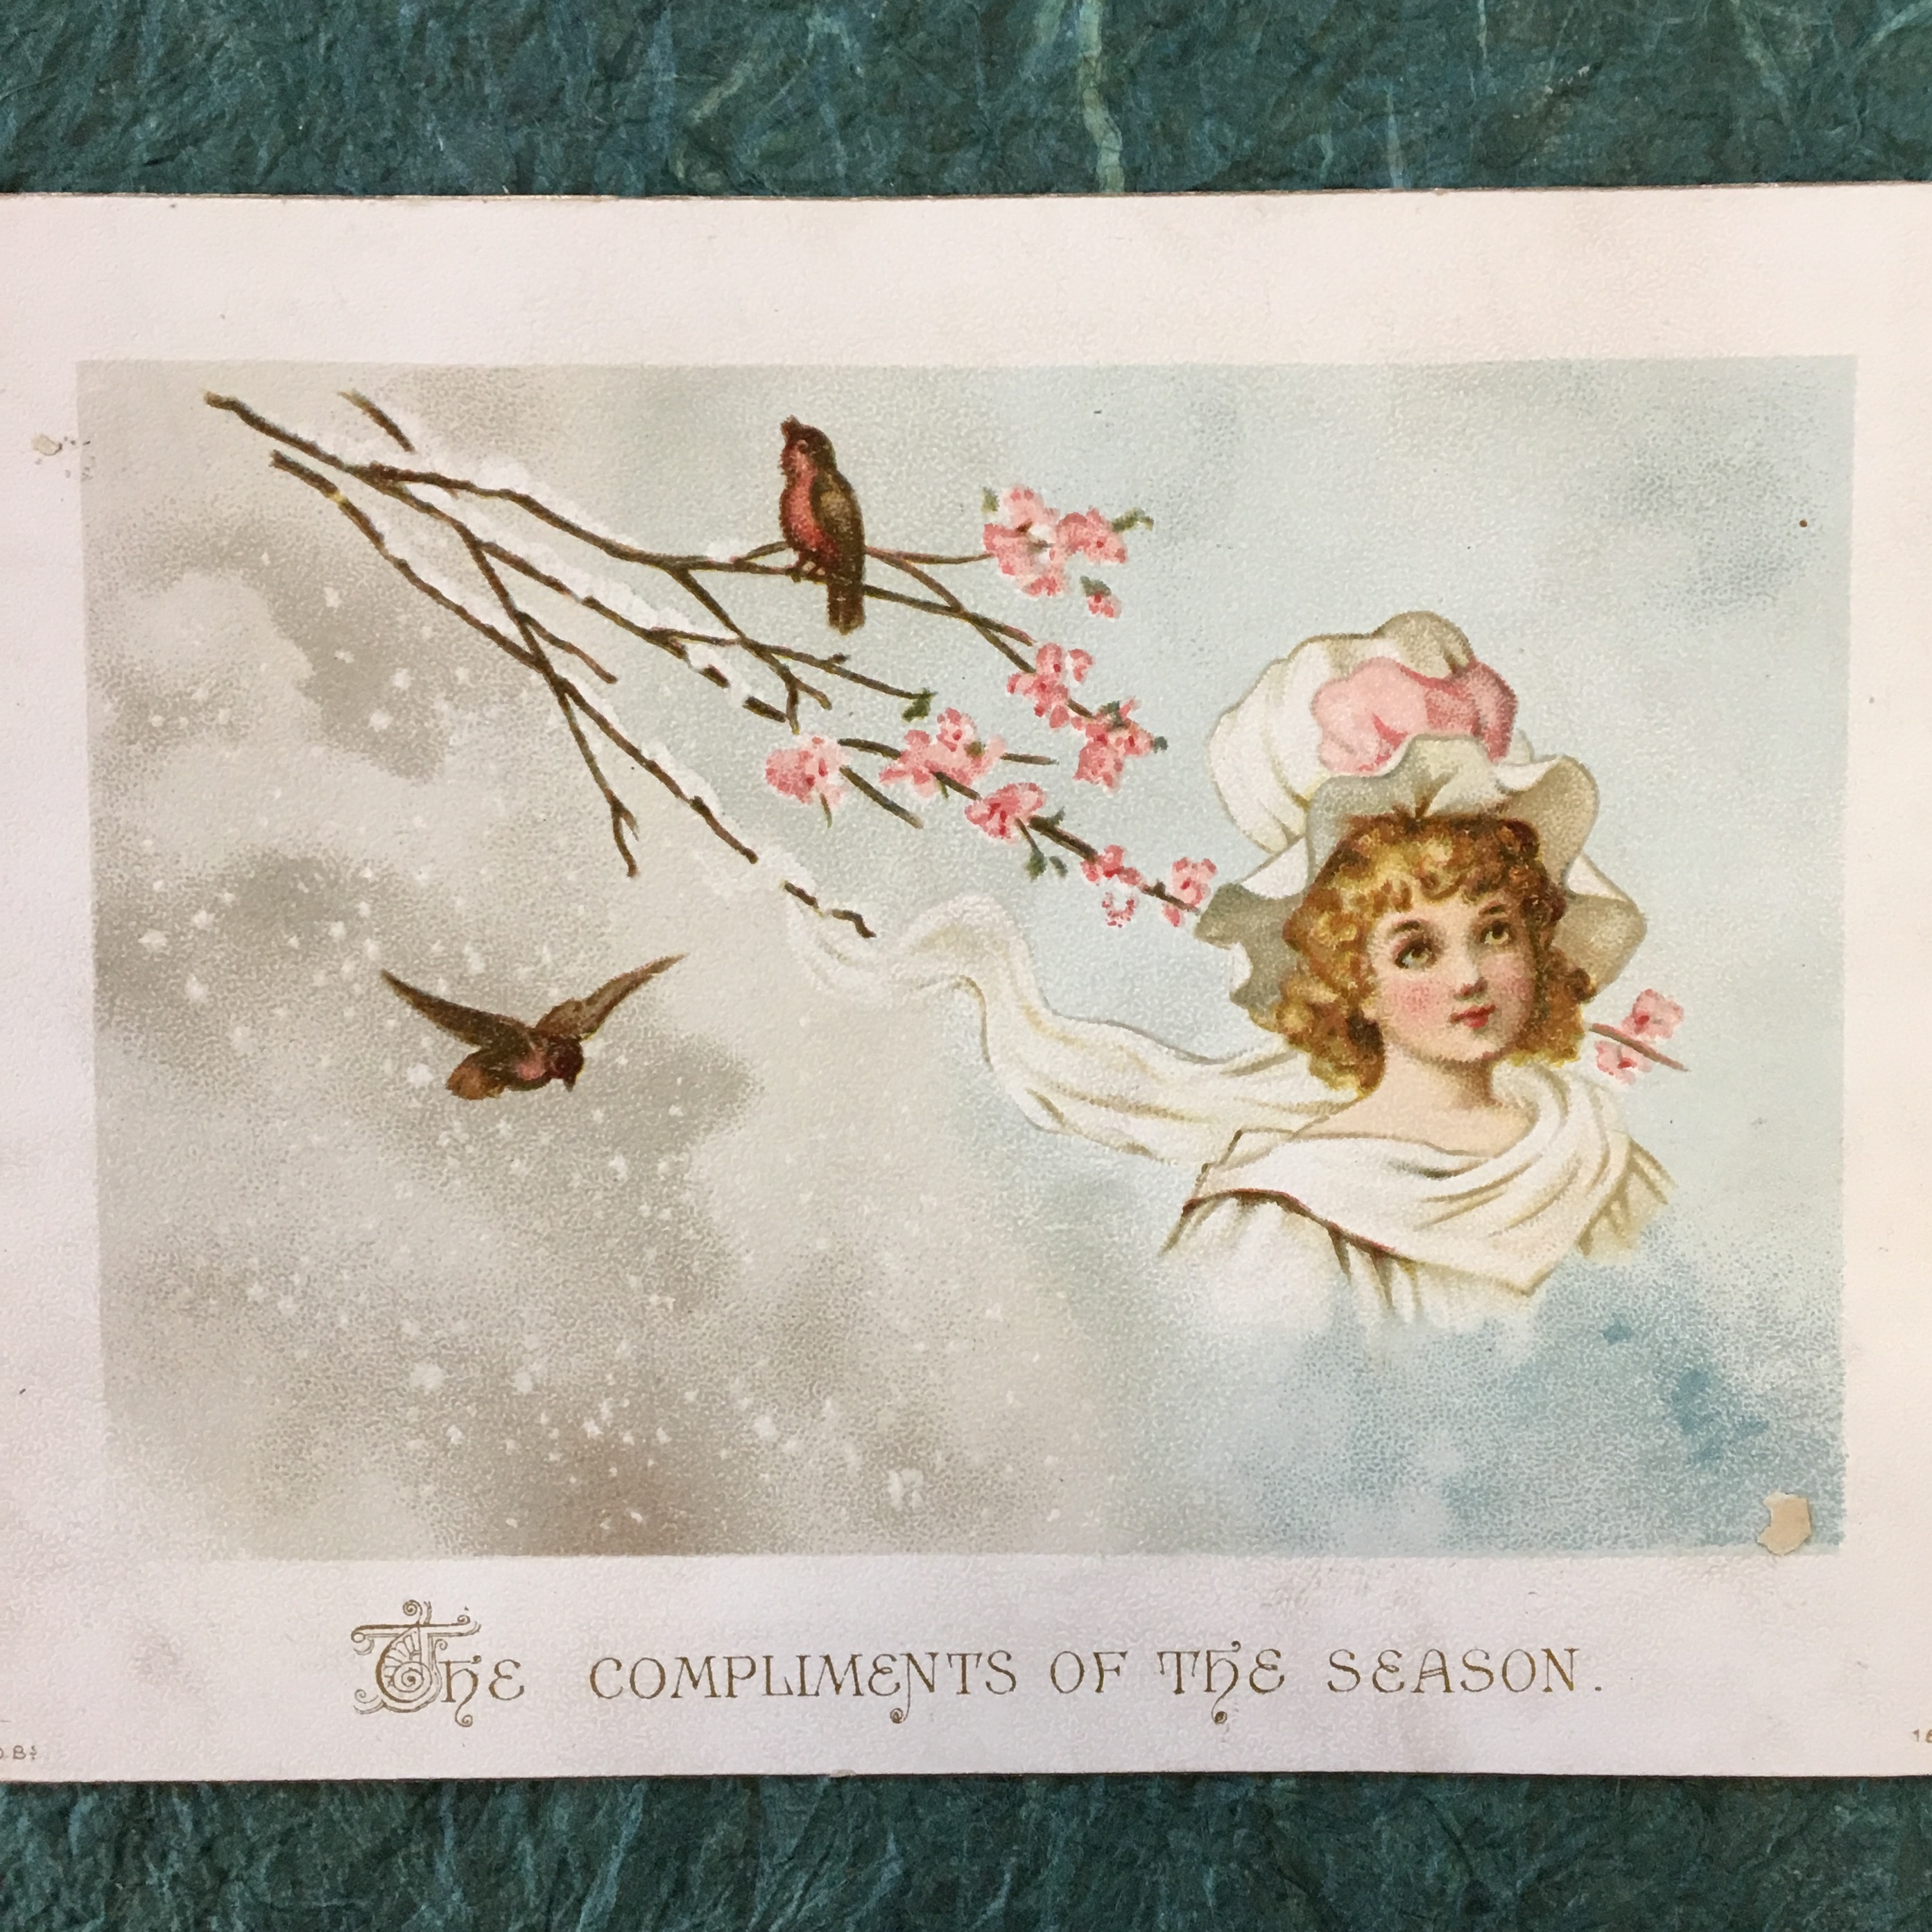 Christmas card with a painting of birds on a tree branch and a girl in all white